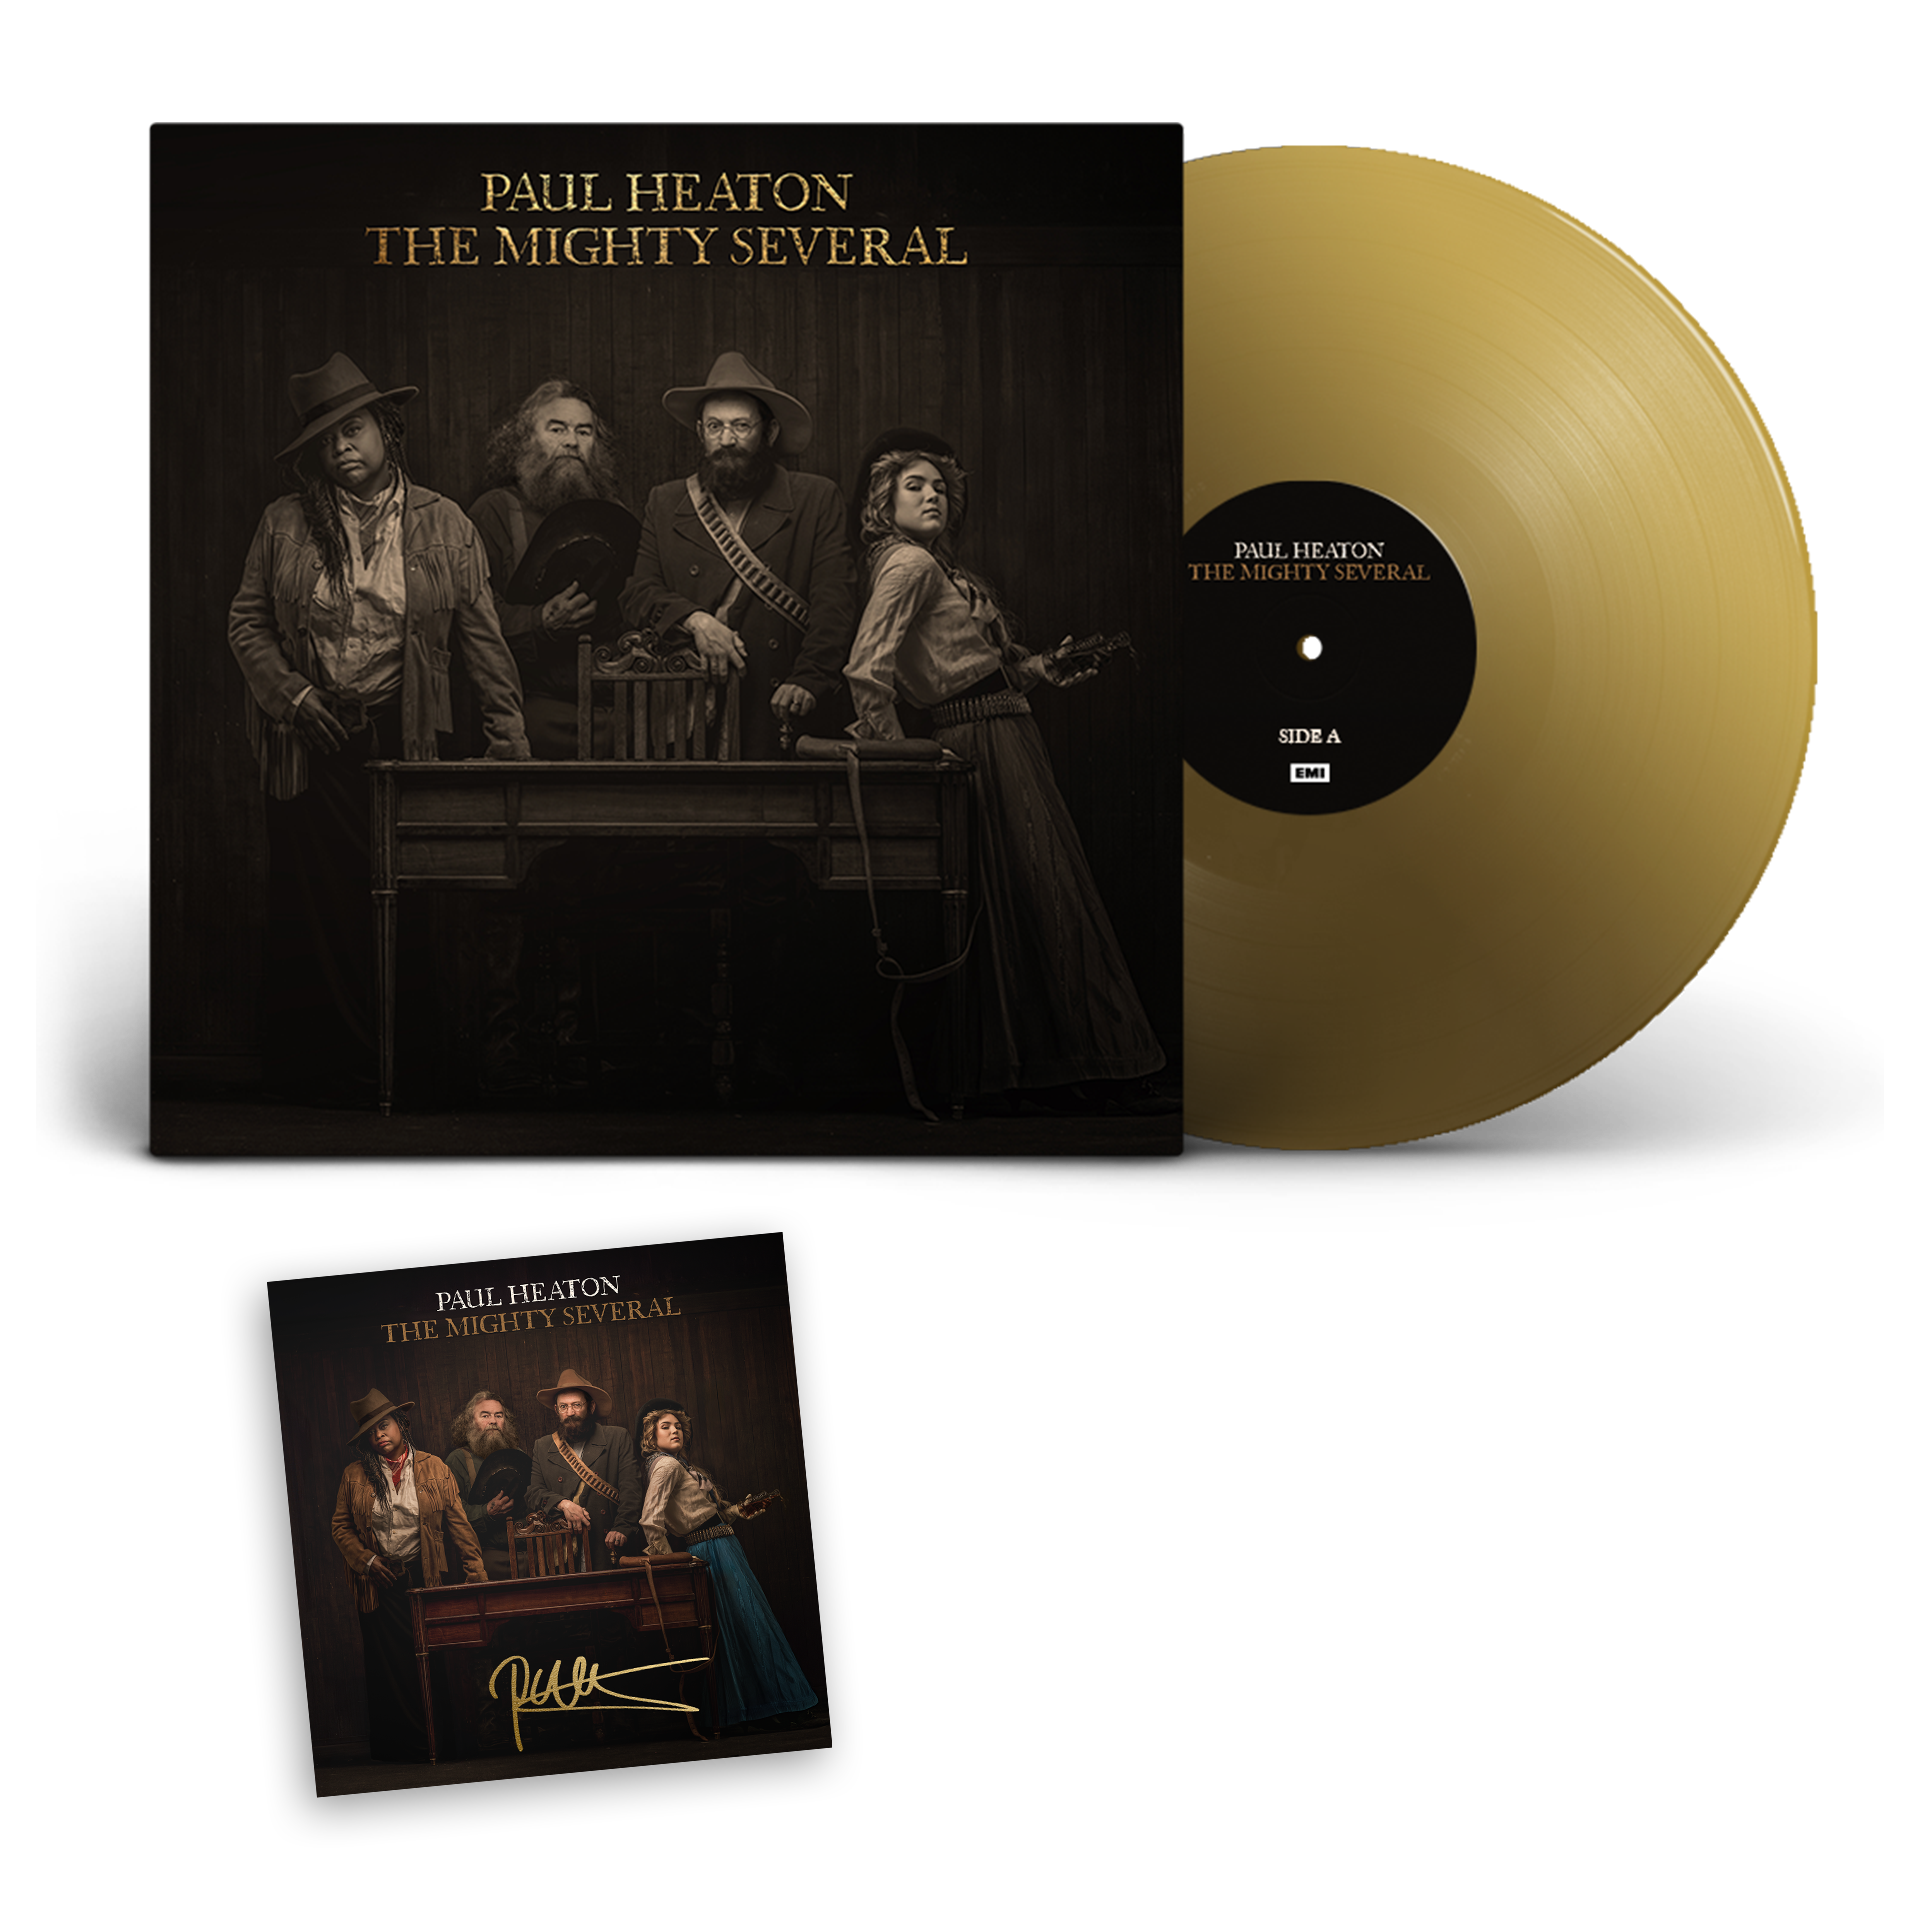 The Mighty Several Exclusive Gatefold Gold Vinyl & Signed Art Card